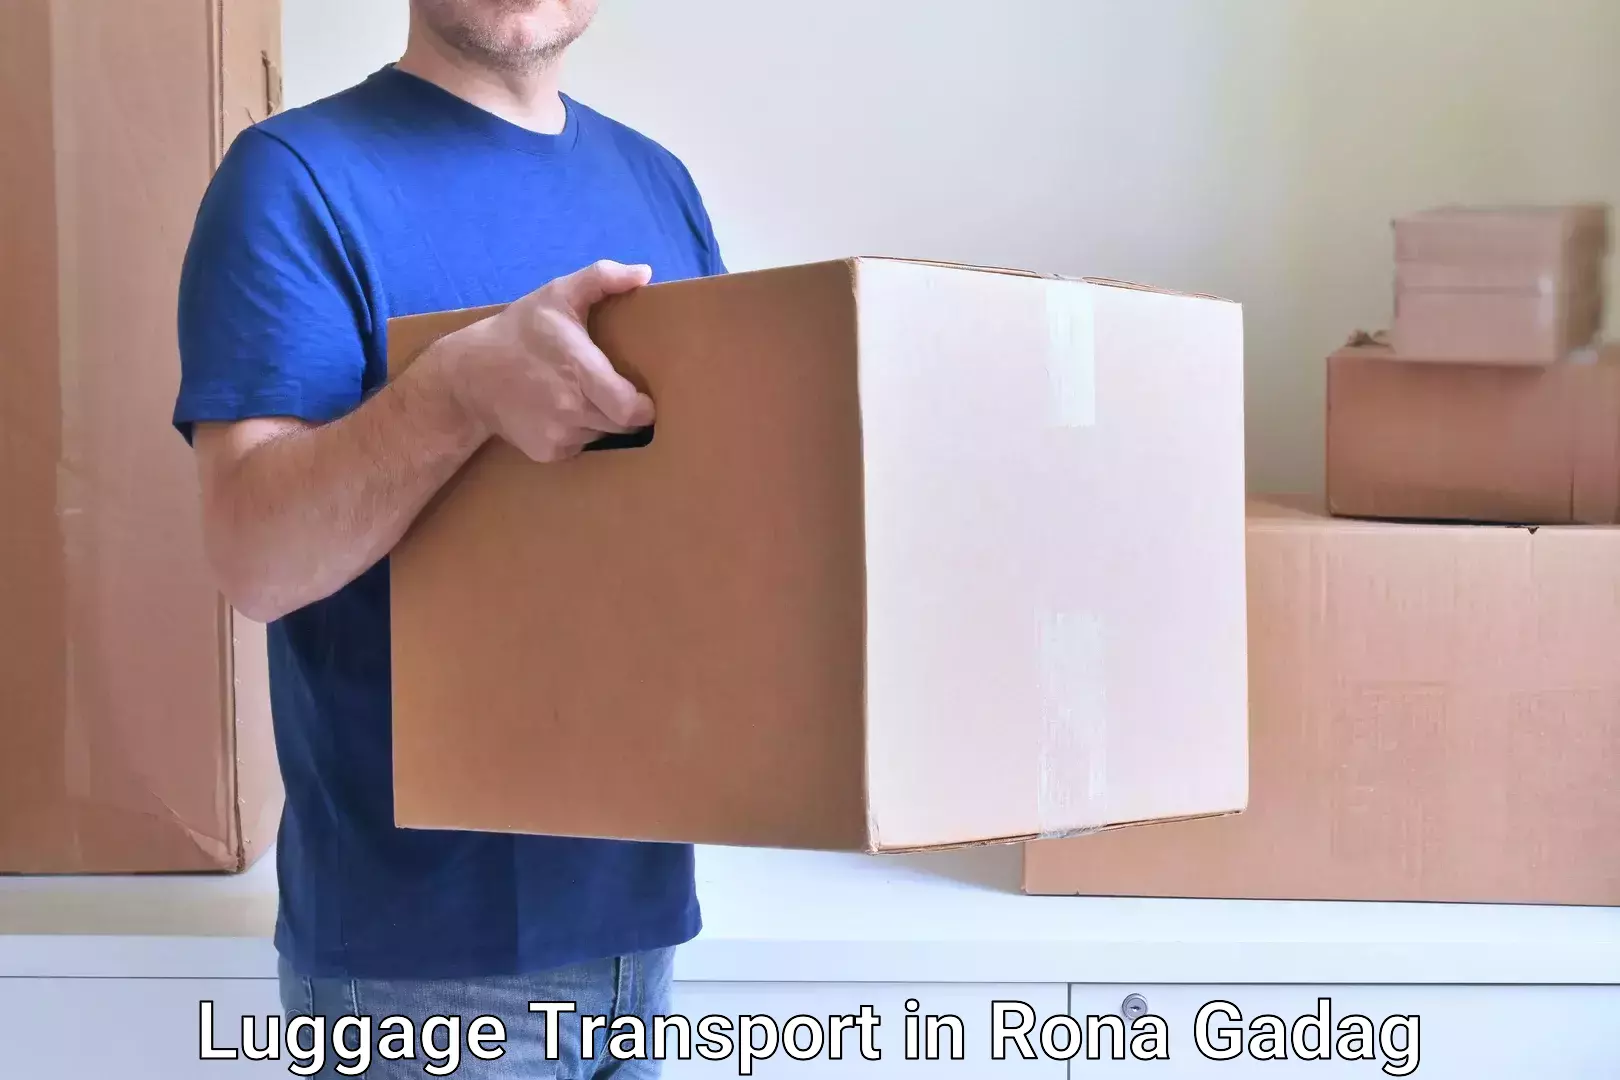 Luggage shipping service in Rona Gadag